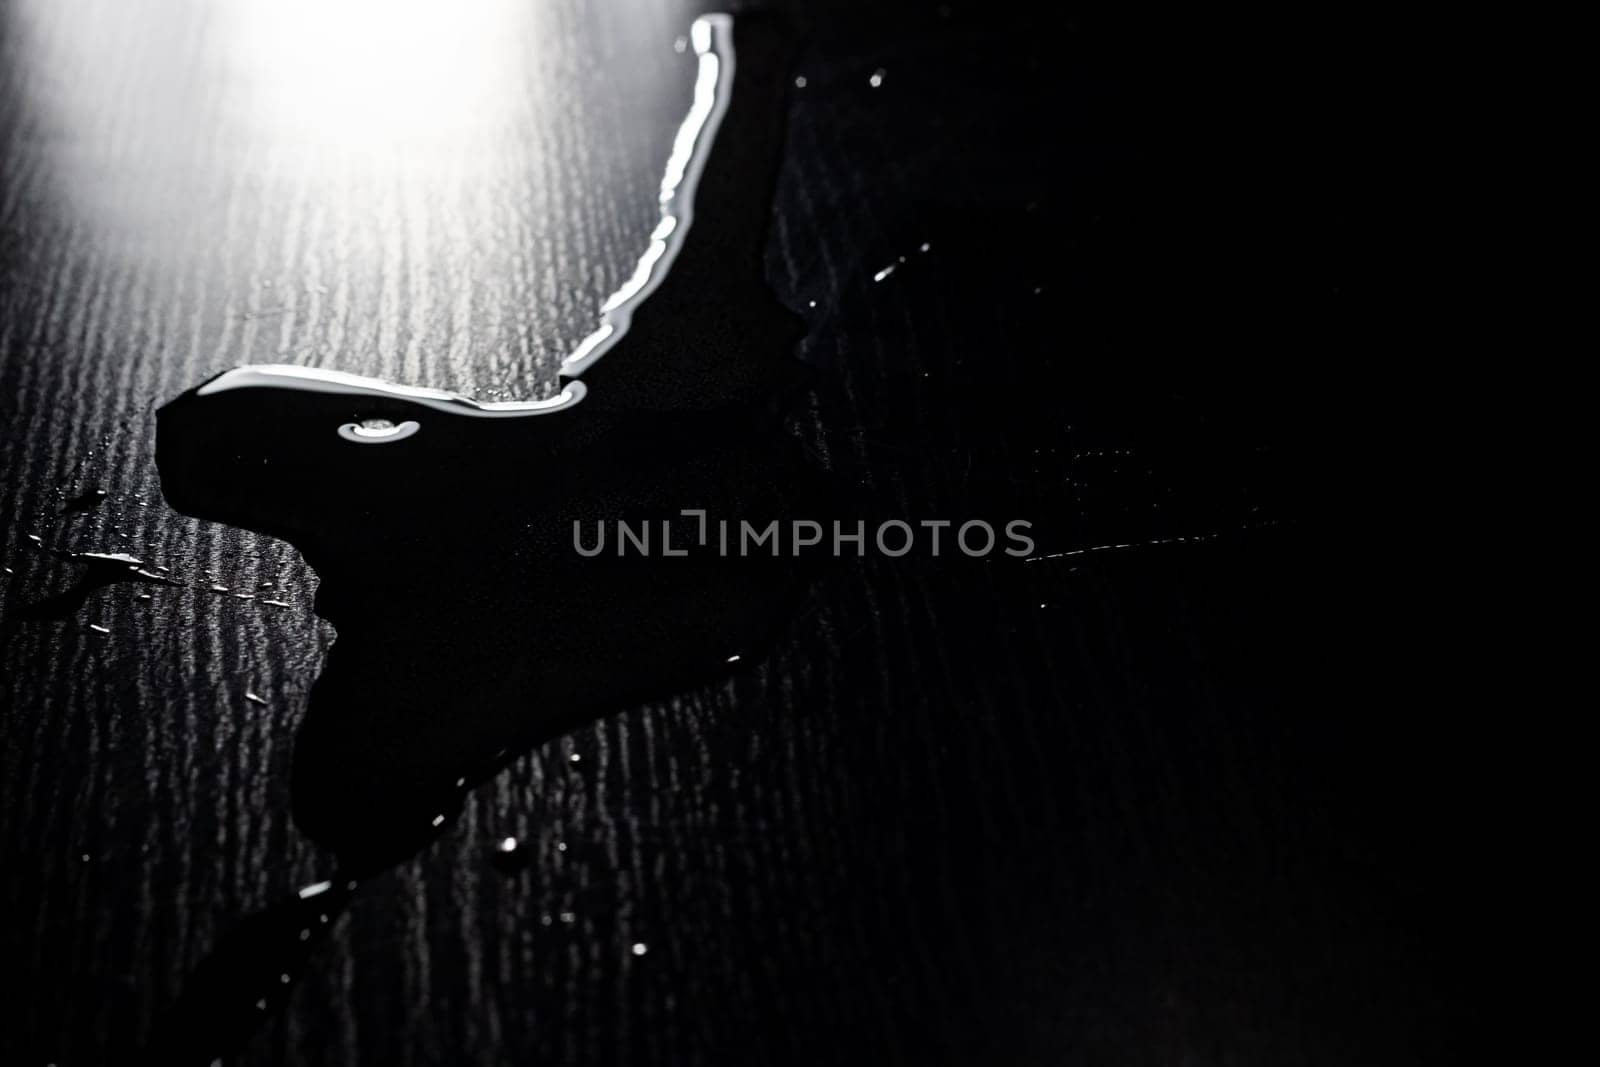 Water spilled on a black table close up by Vera1703